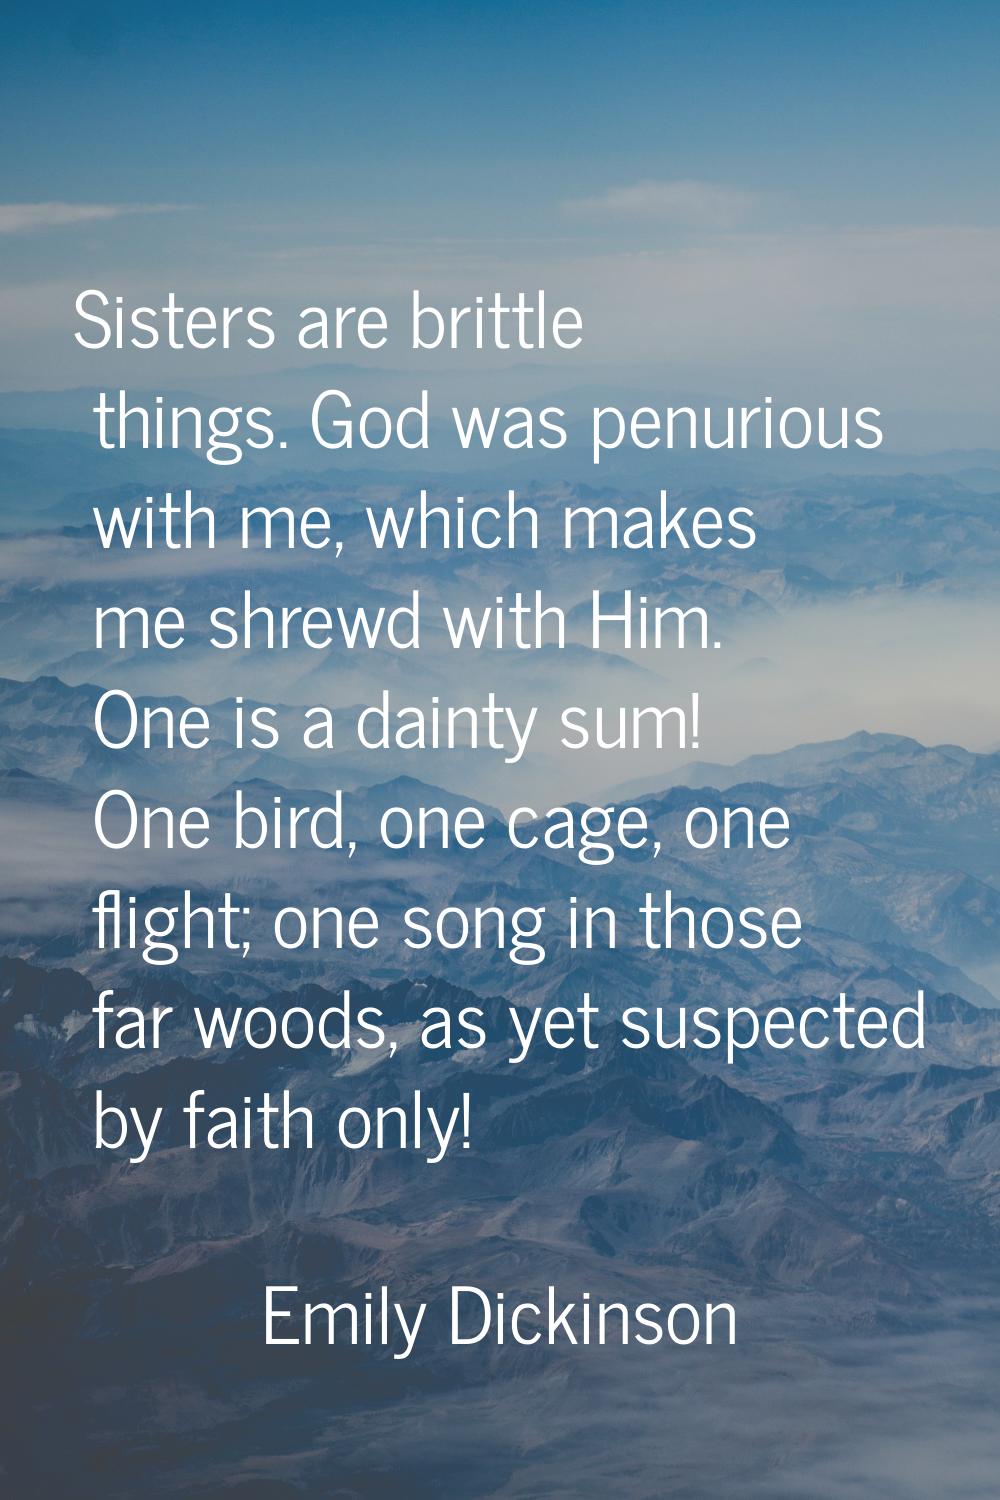 Sisters are brittle things. God was penurious with me, which makes me shrewd with Him. One is a dai